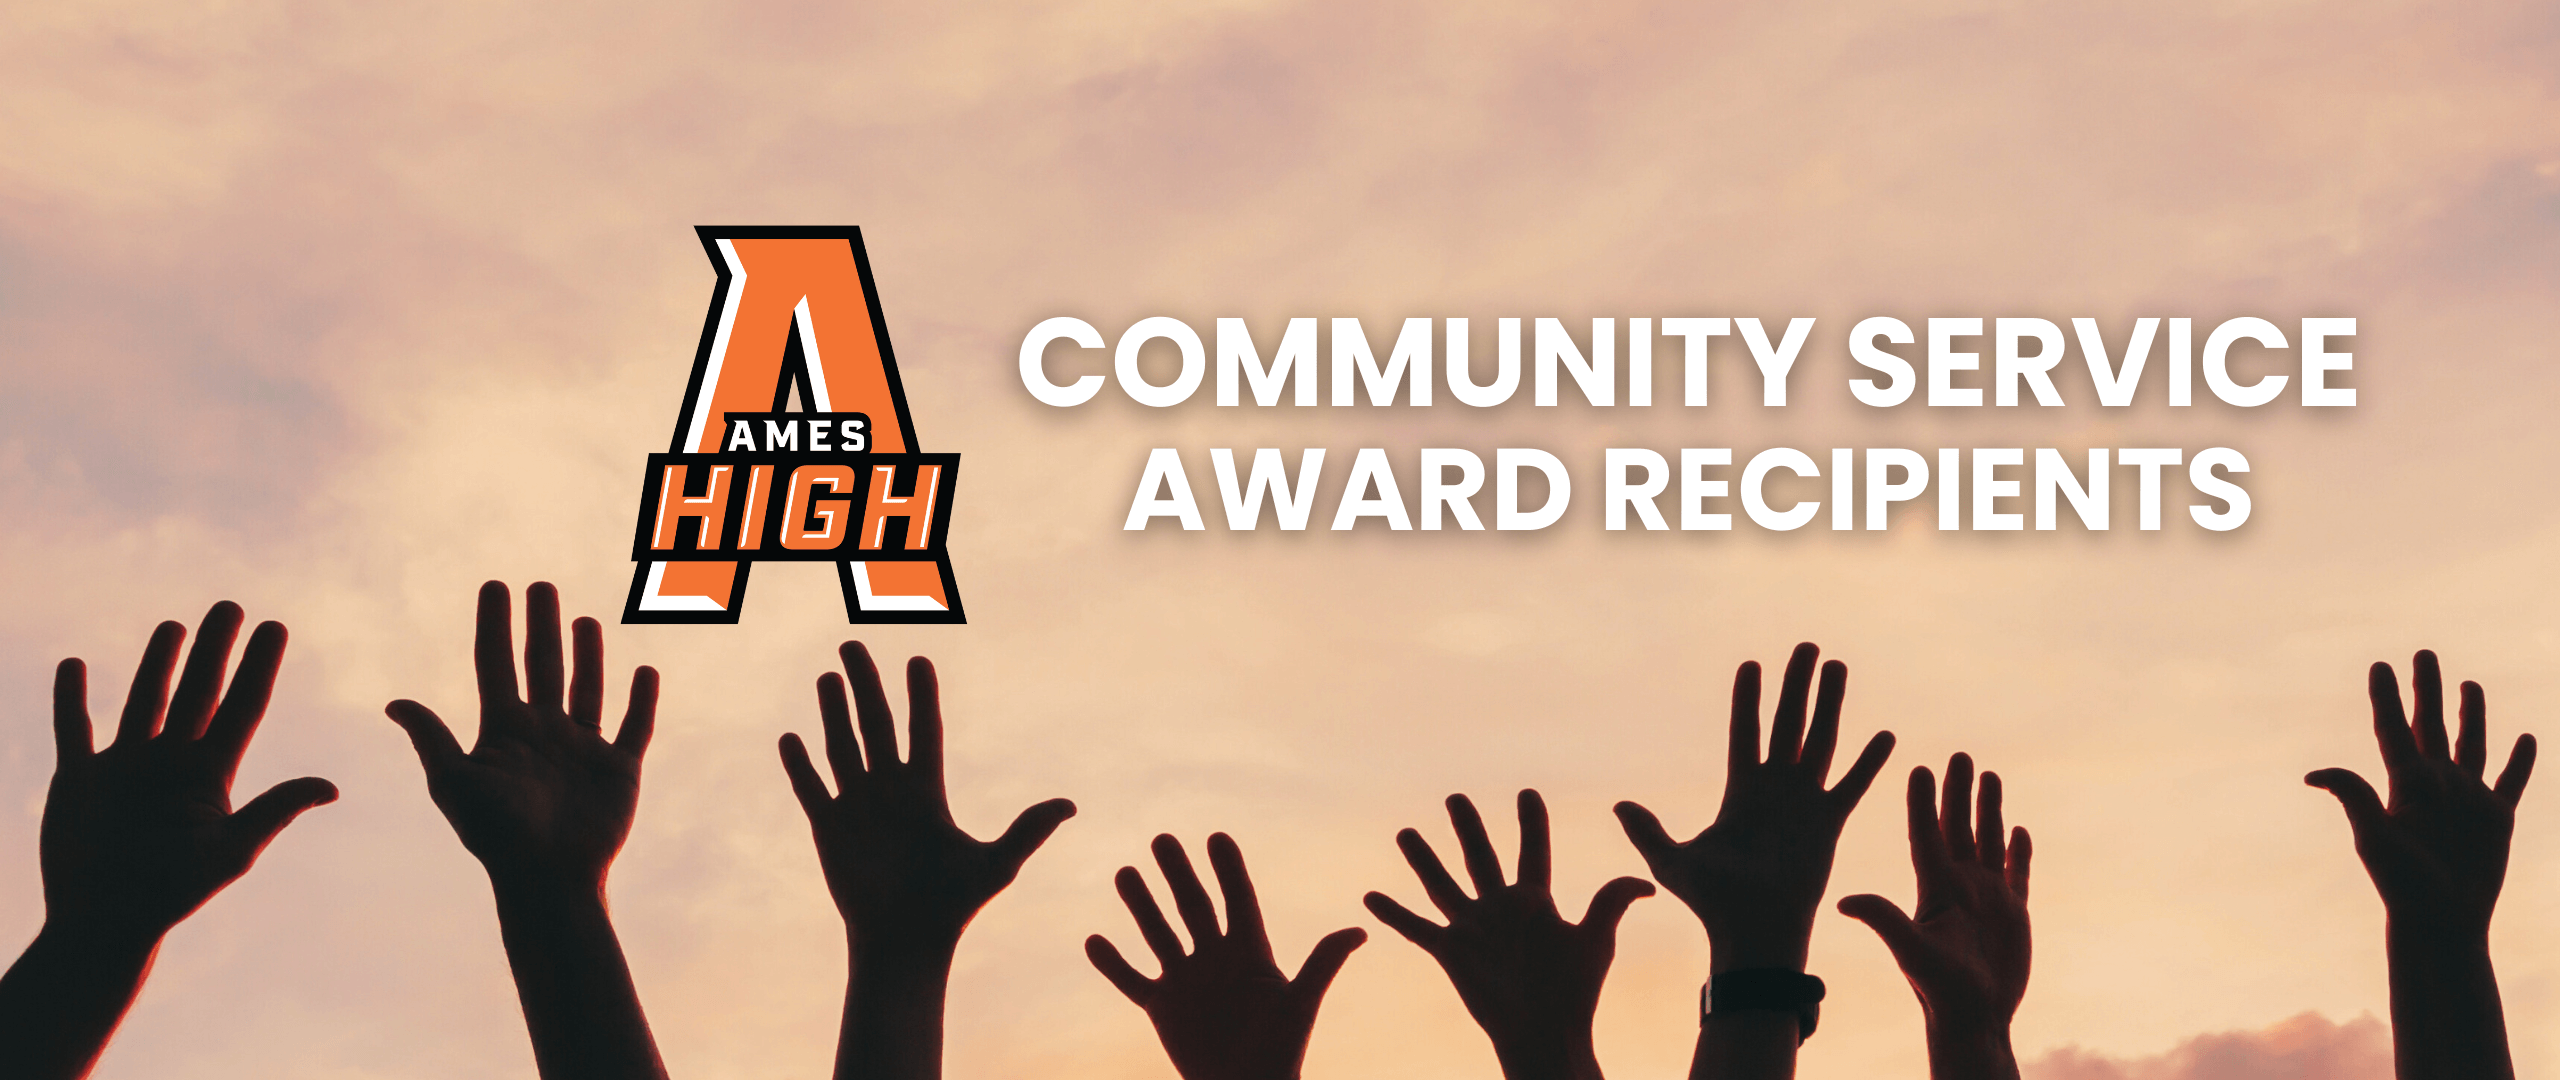 Ames High School Students Earn National Awards For Community Service Impact